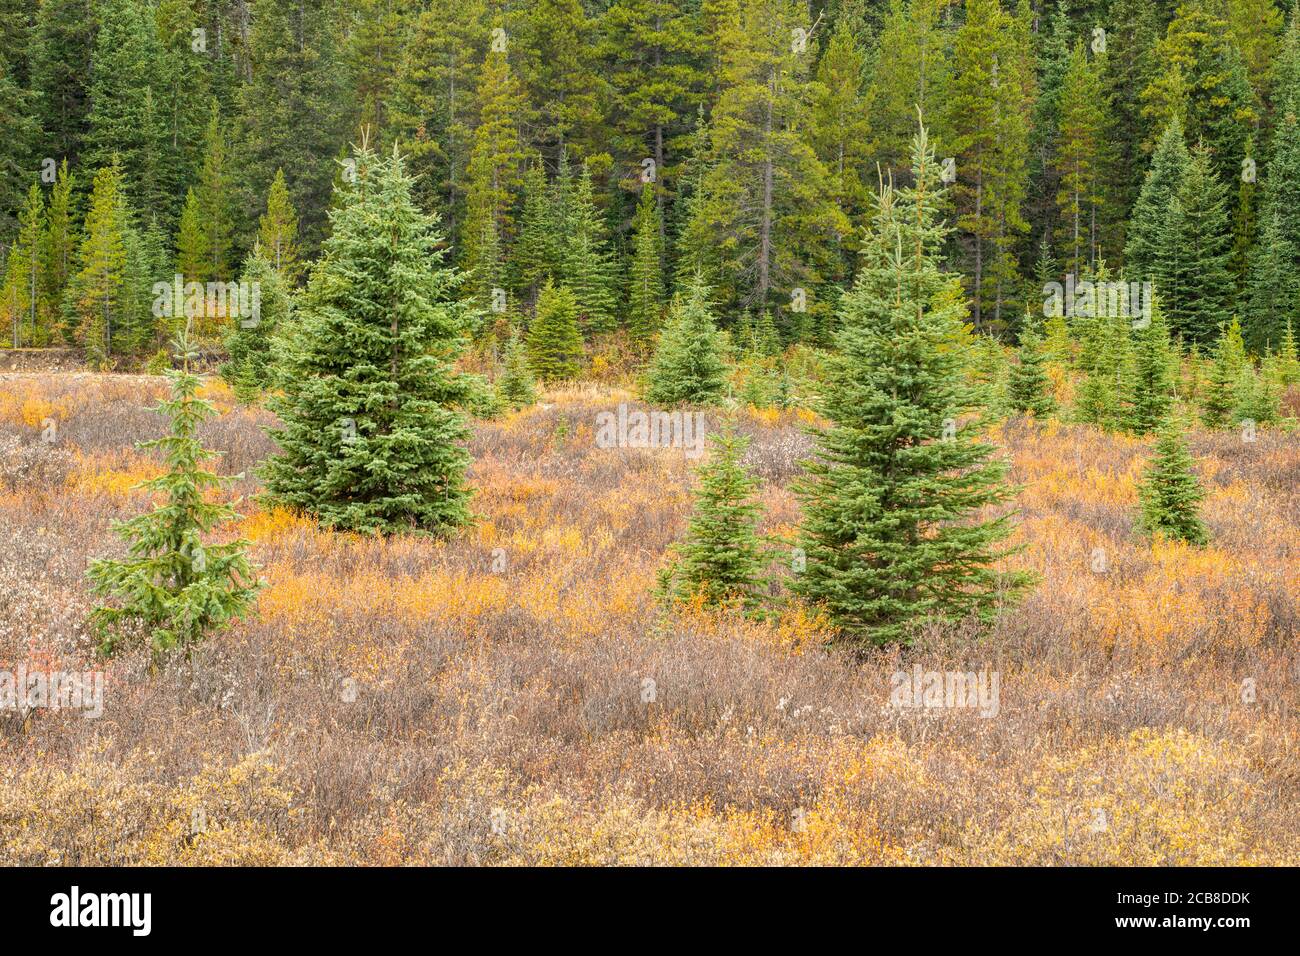 Conifers and dwarf birch in autumn, Peter Loughheed Provincial Park, Alberta, Canada Stock Photo